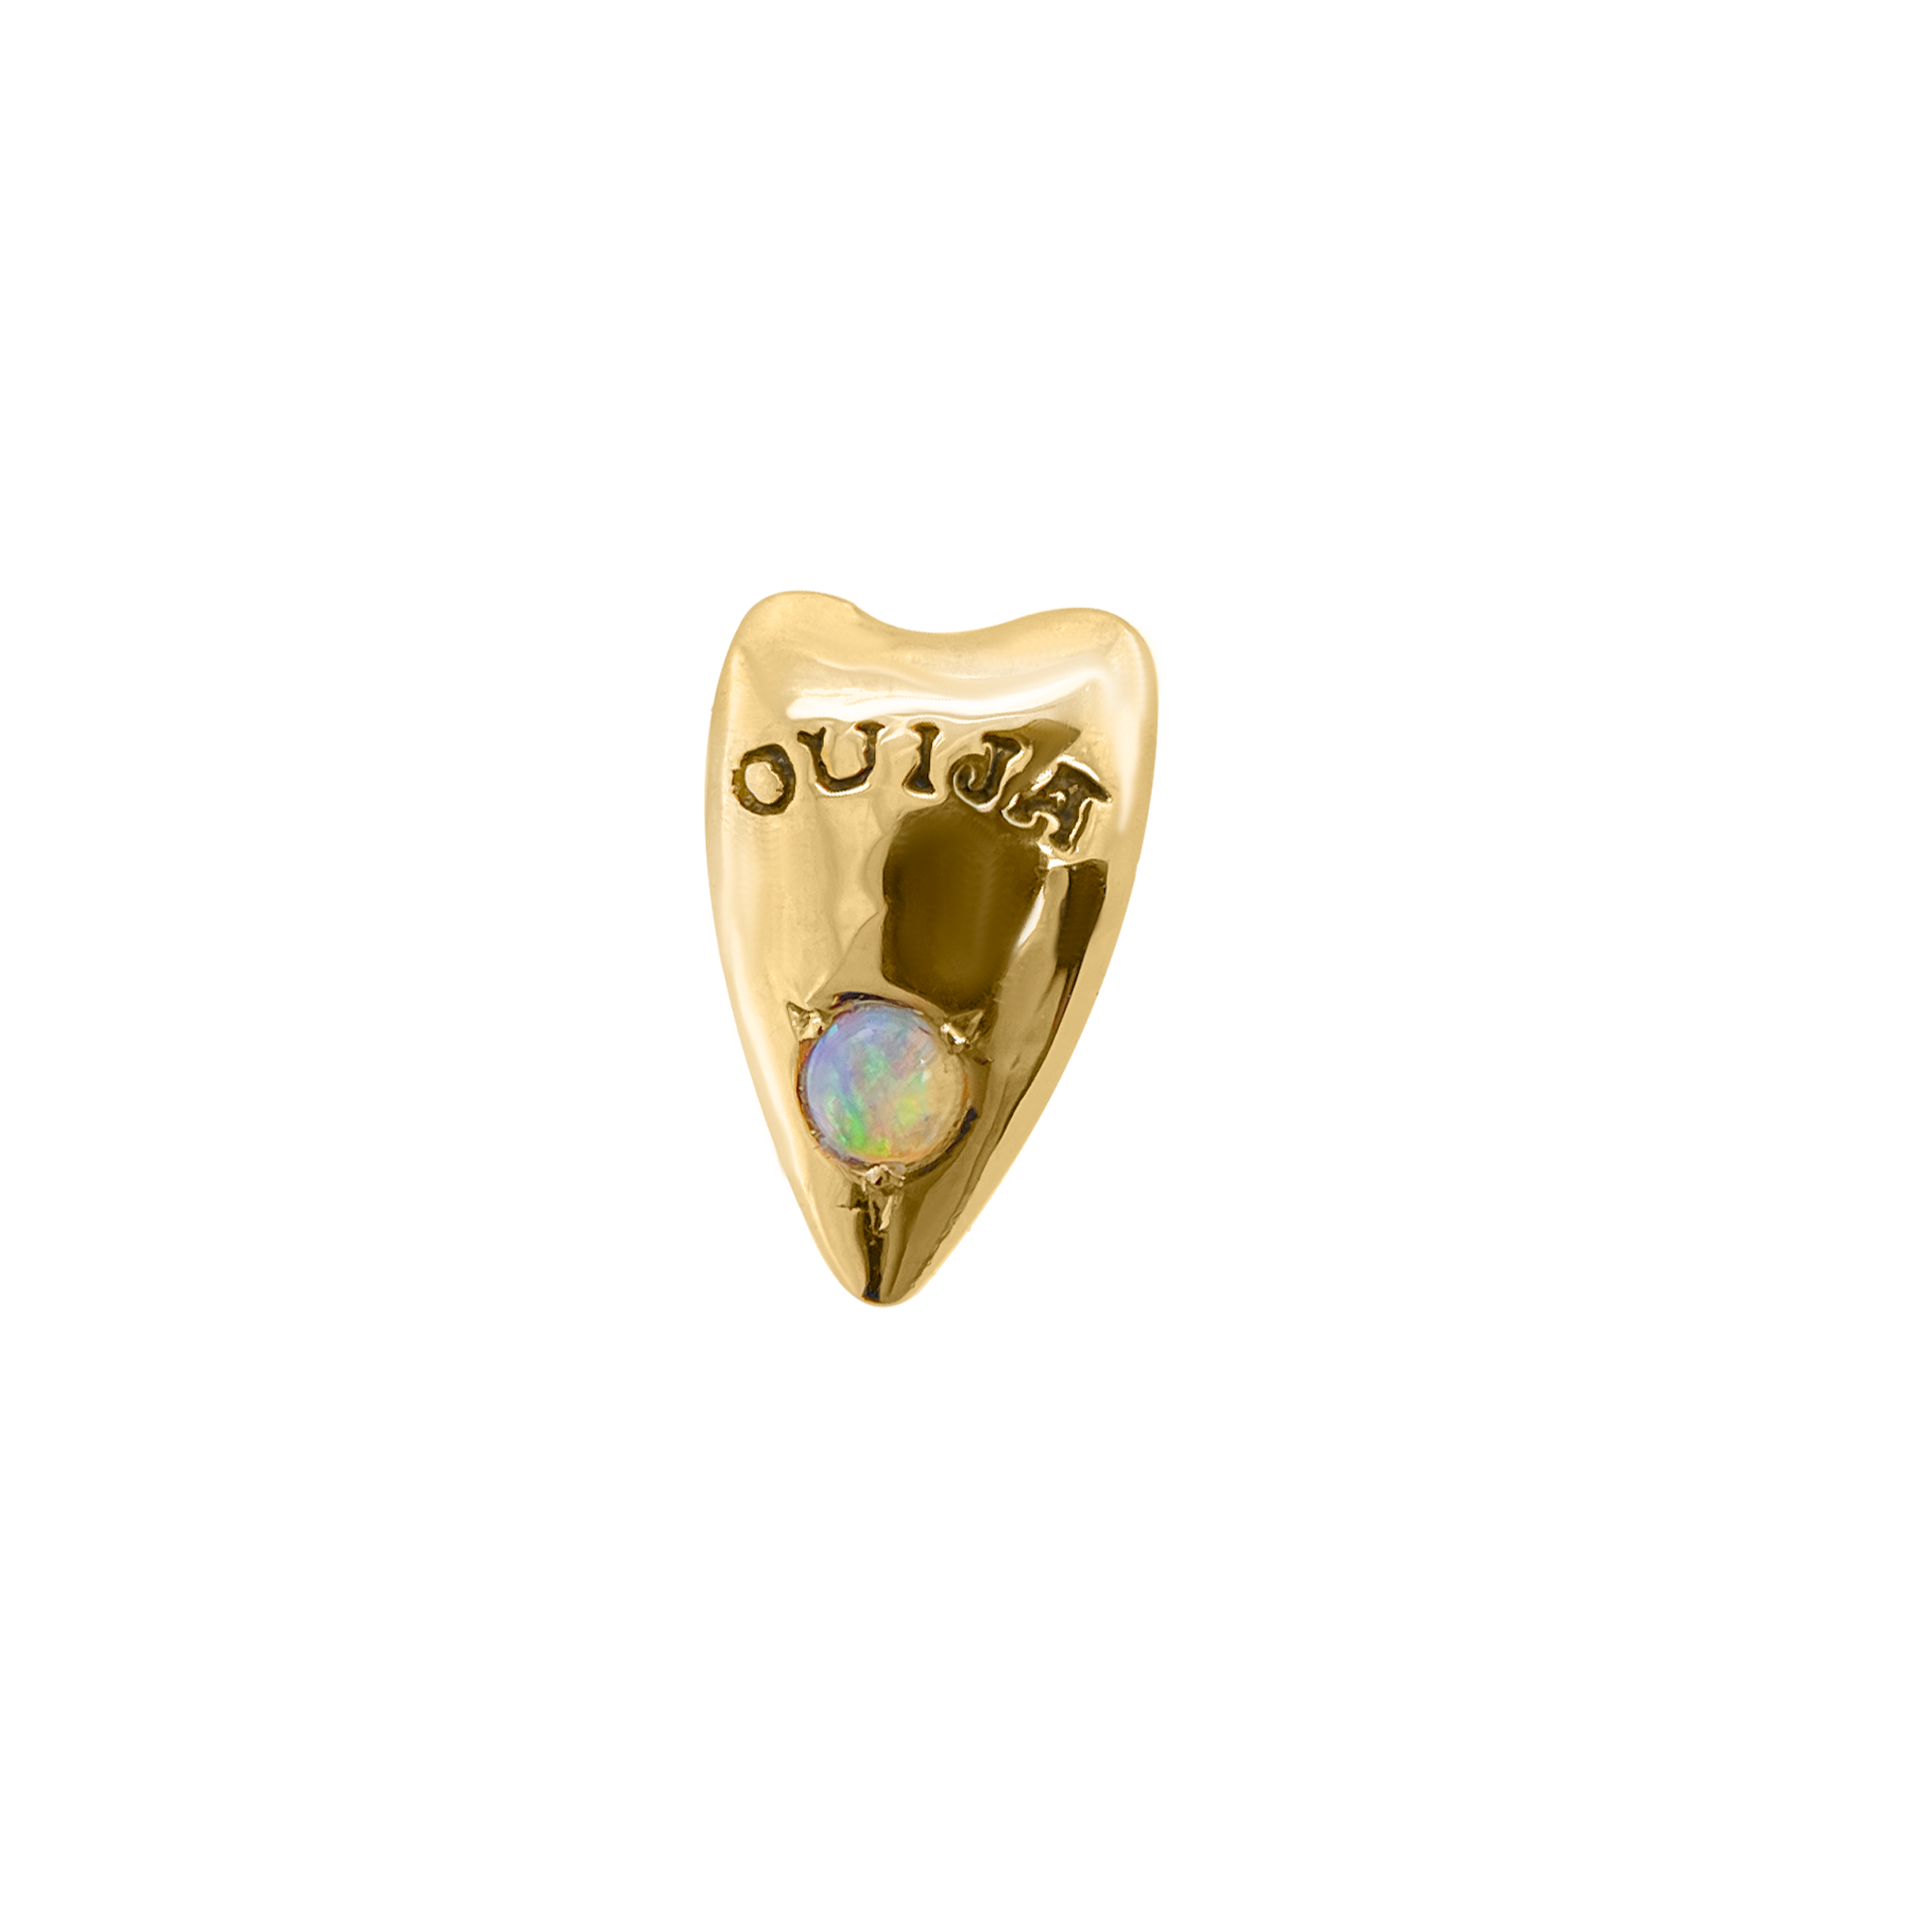 Ouija Planchette with Opal Threaded Stud